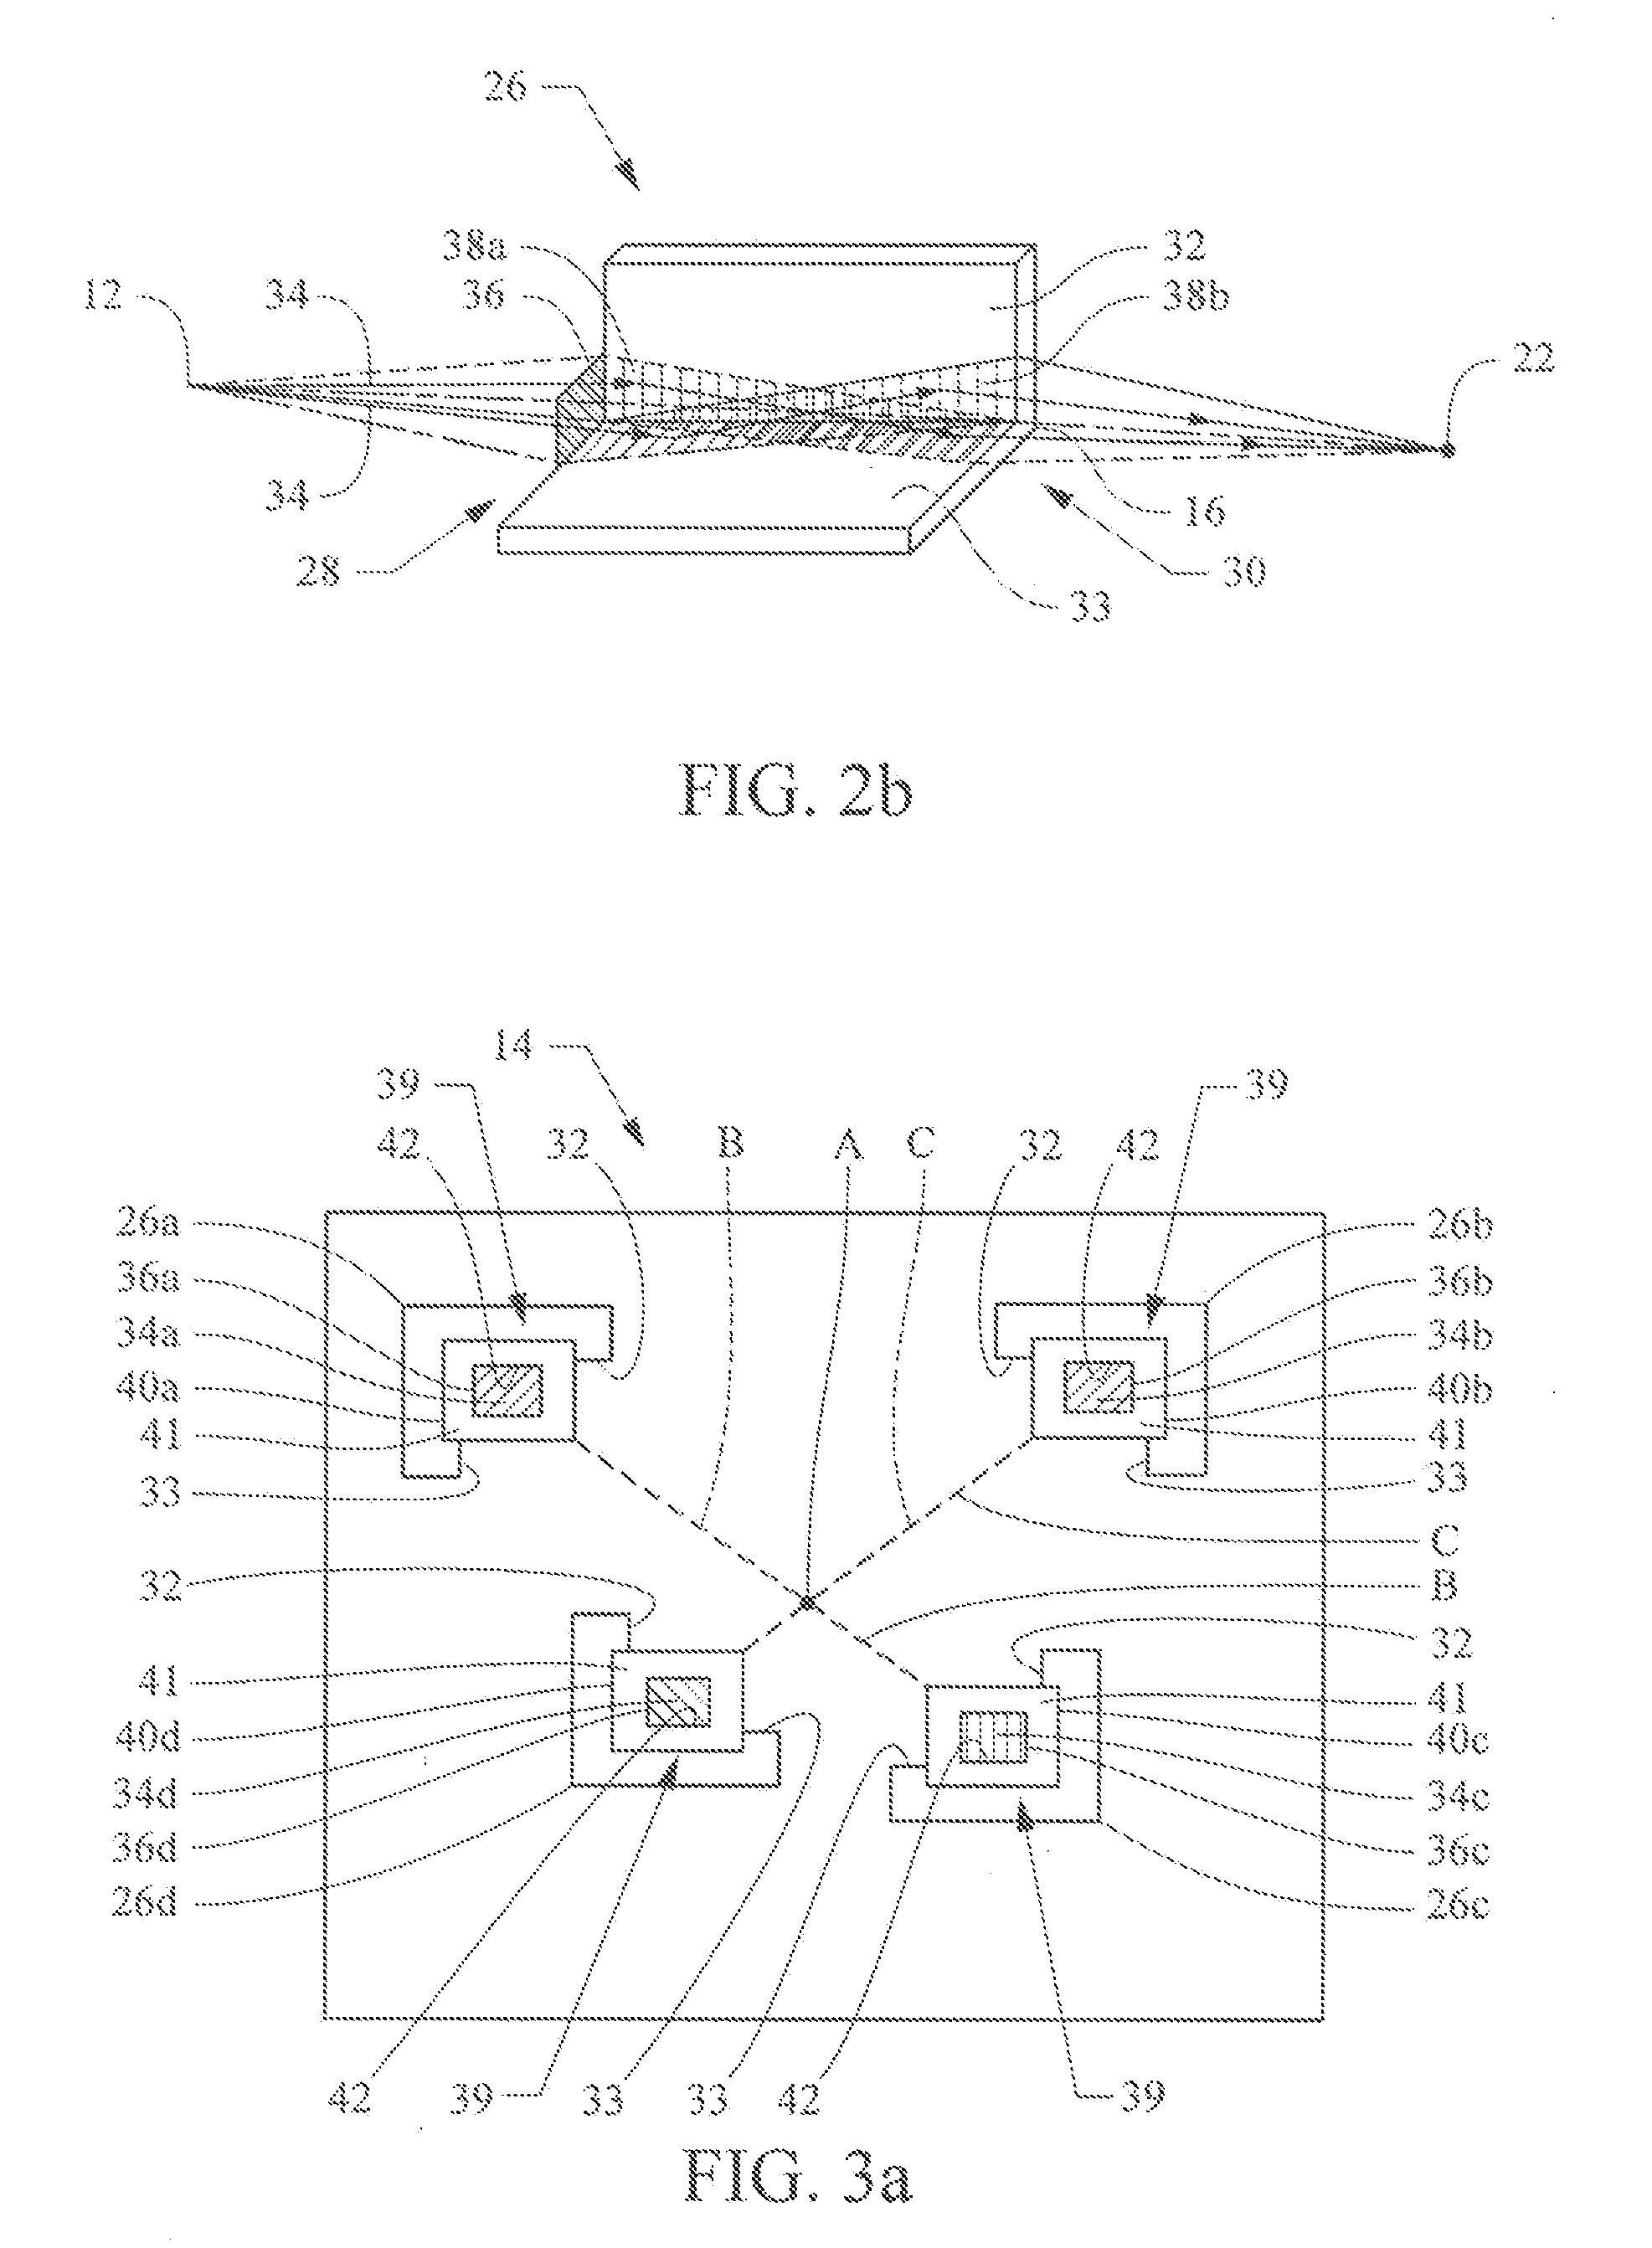 X-ray optical systems with adjustable convergence and focal spot size